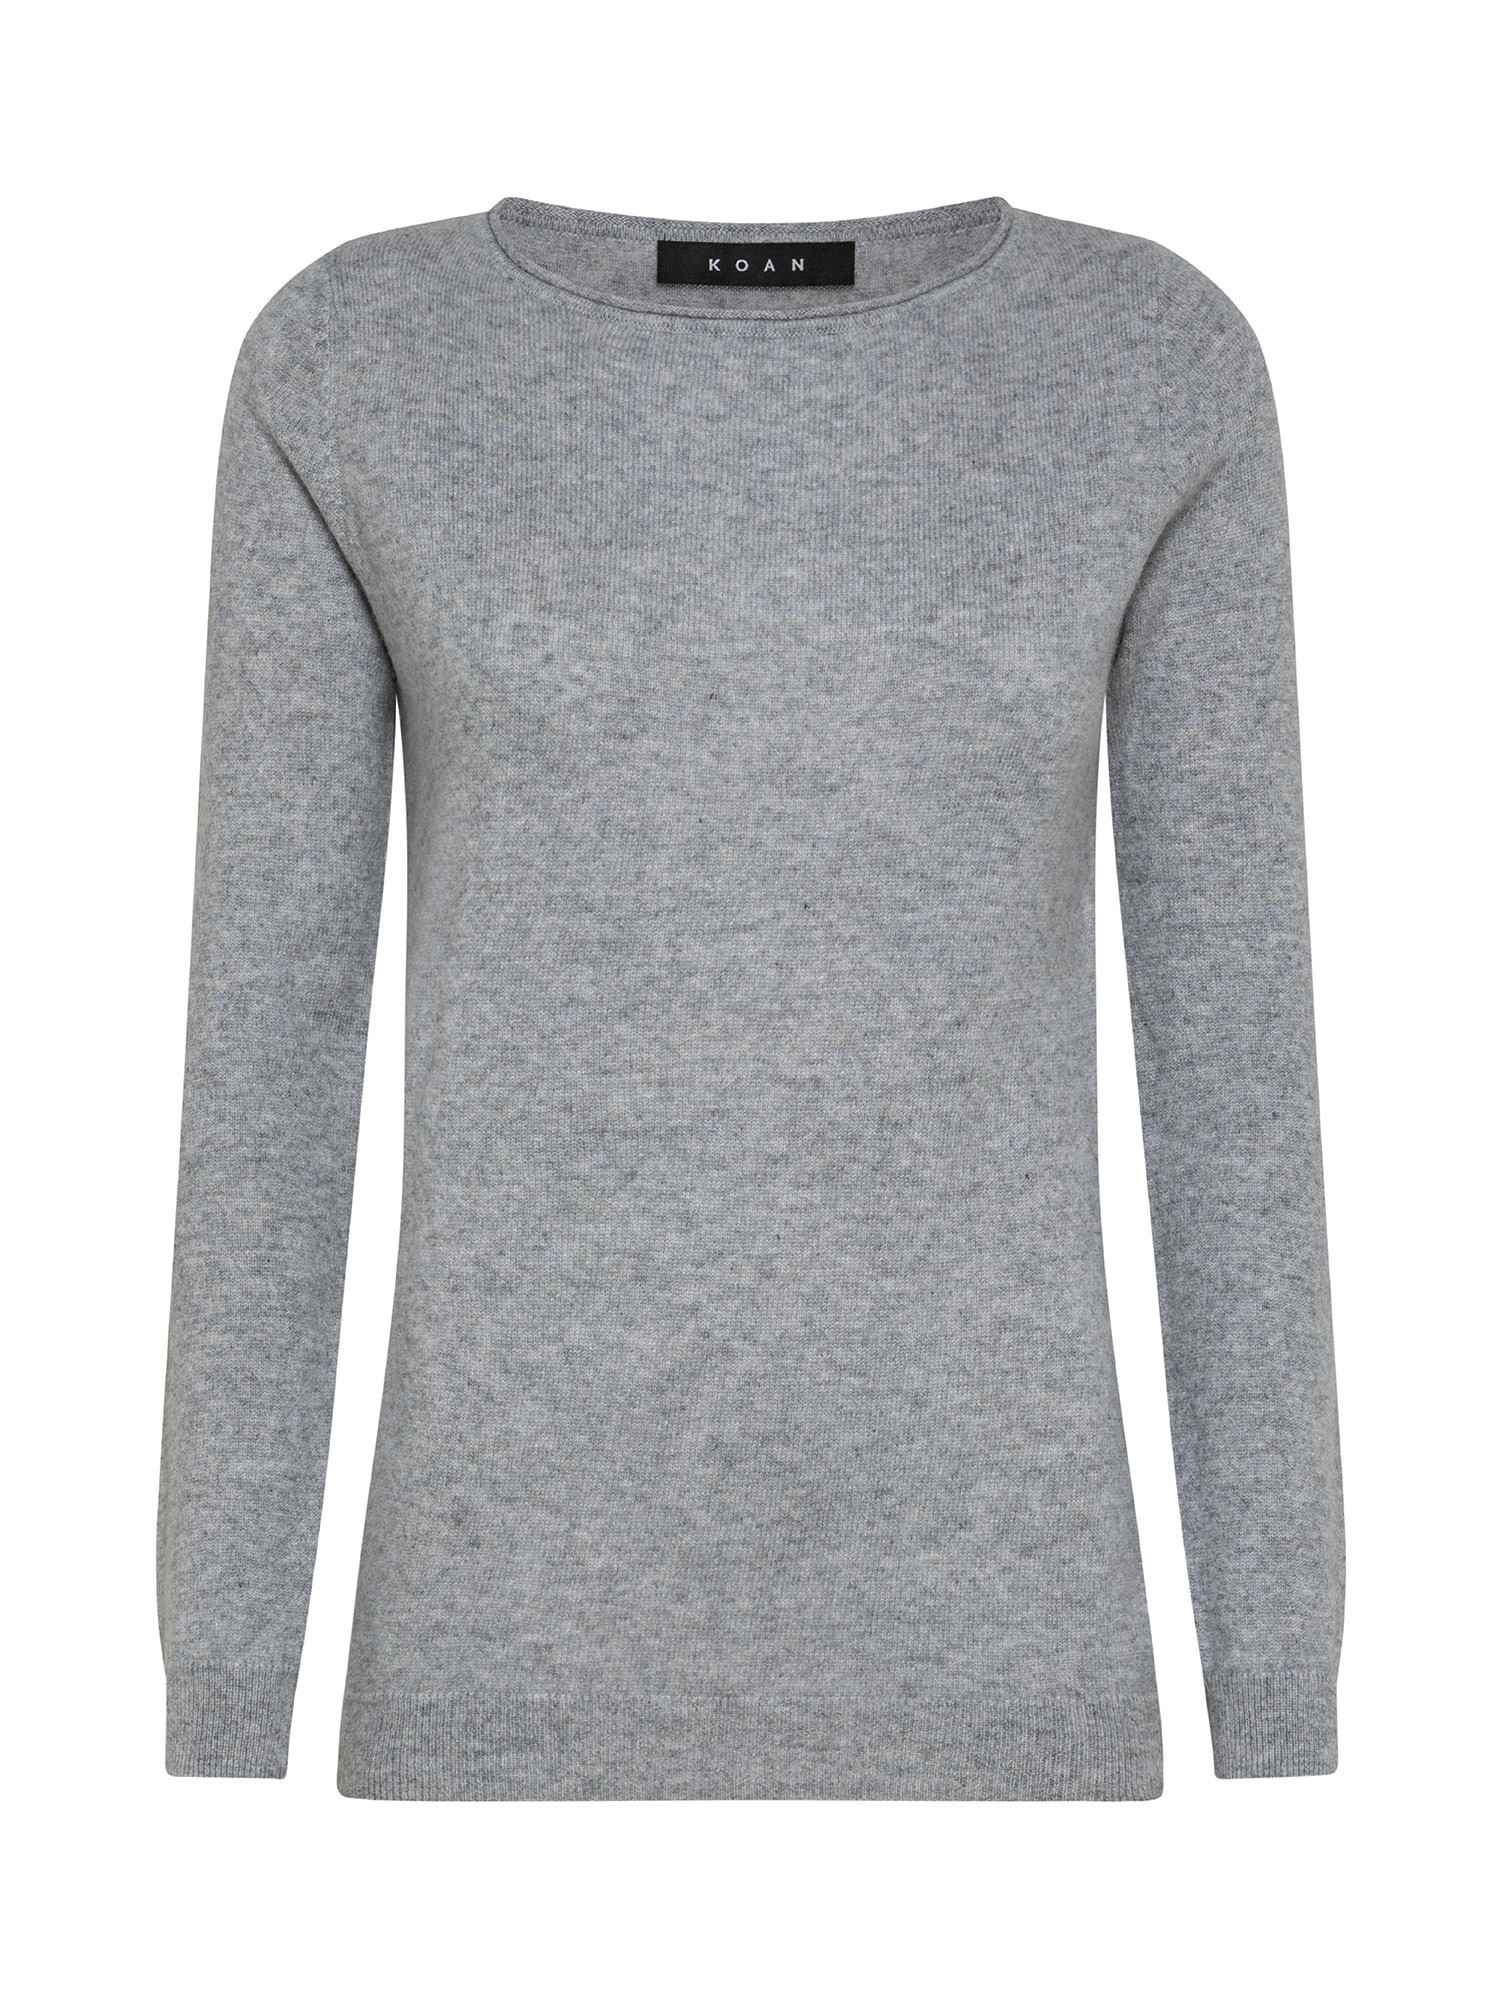 Koan - Pure cashmere boat neck pullover, Grey, large image number 0